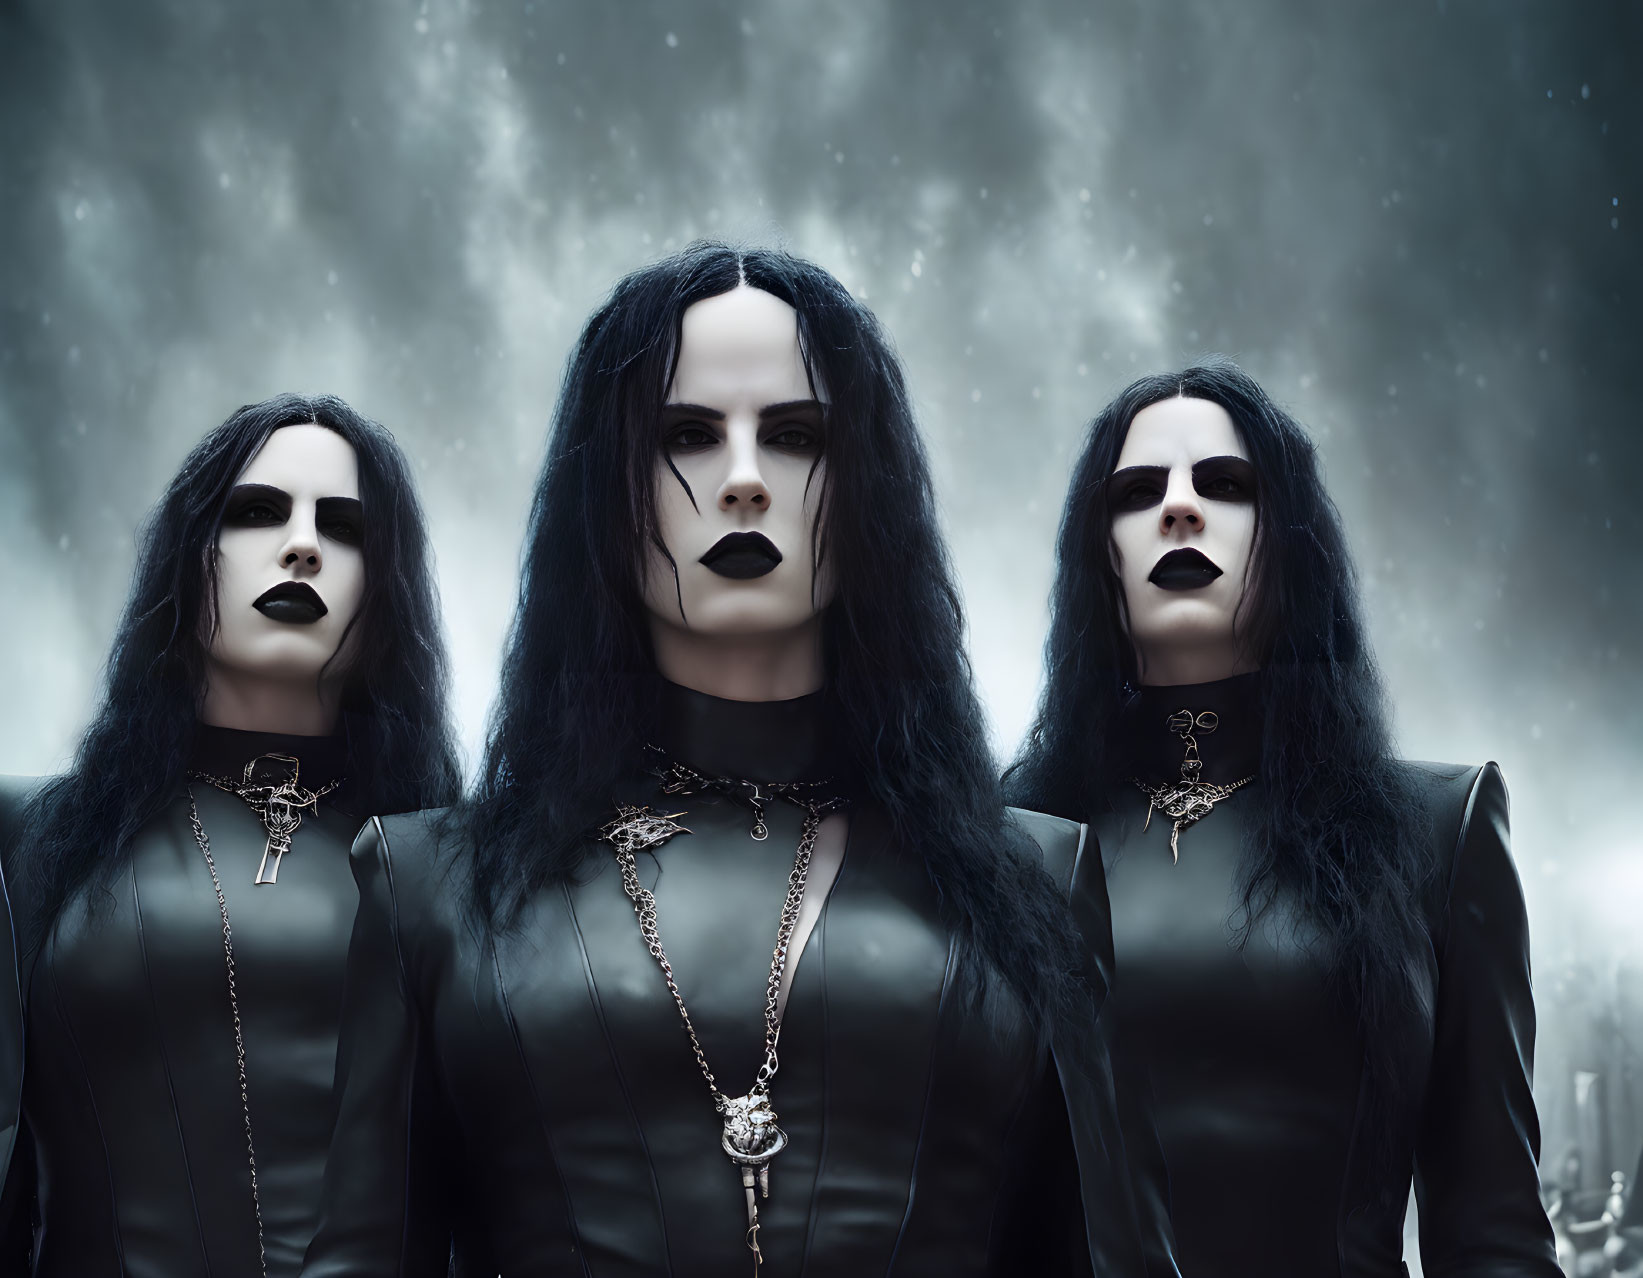 Three individuals in goth makeup and black clothing against misty background